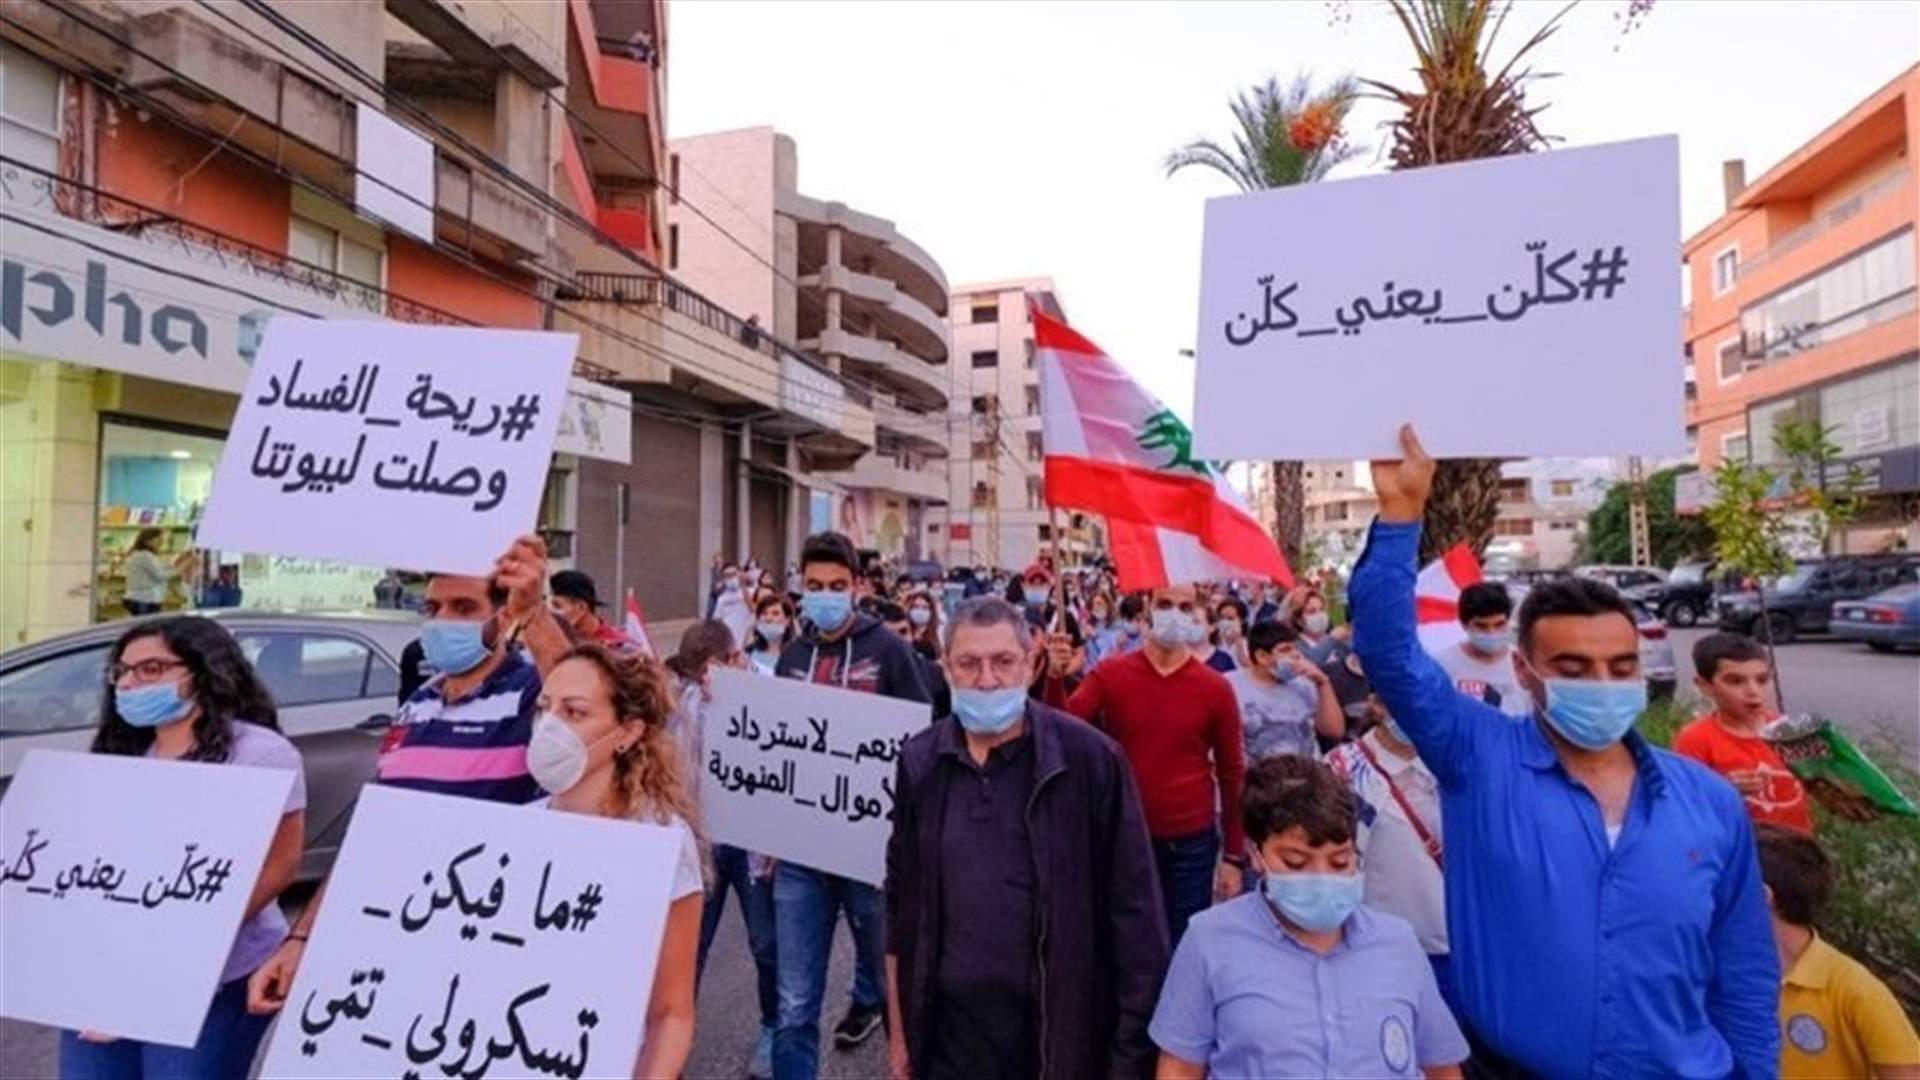 Silent march in Zgharta in support with Lebanon’s protests-[PHOTO]